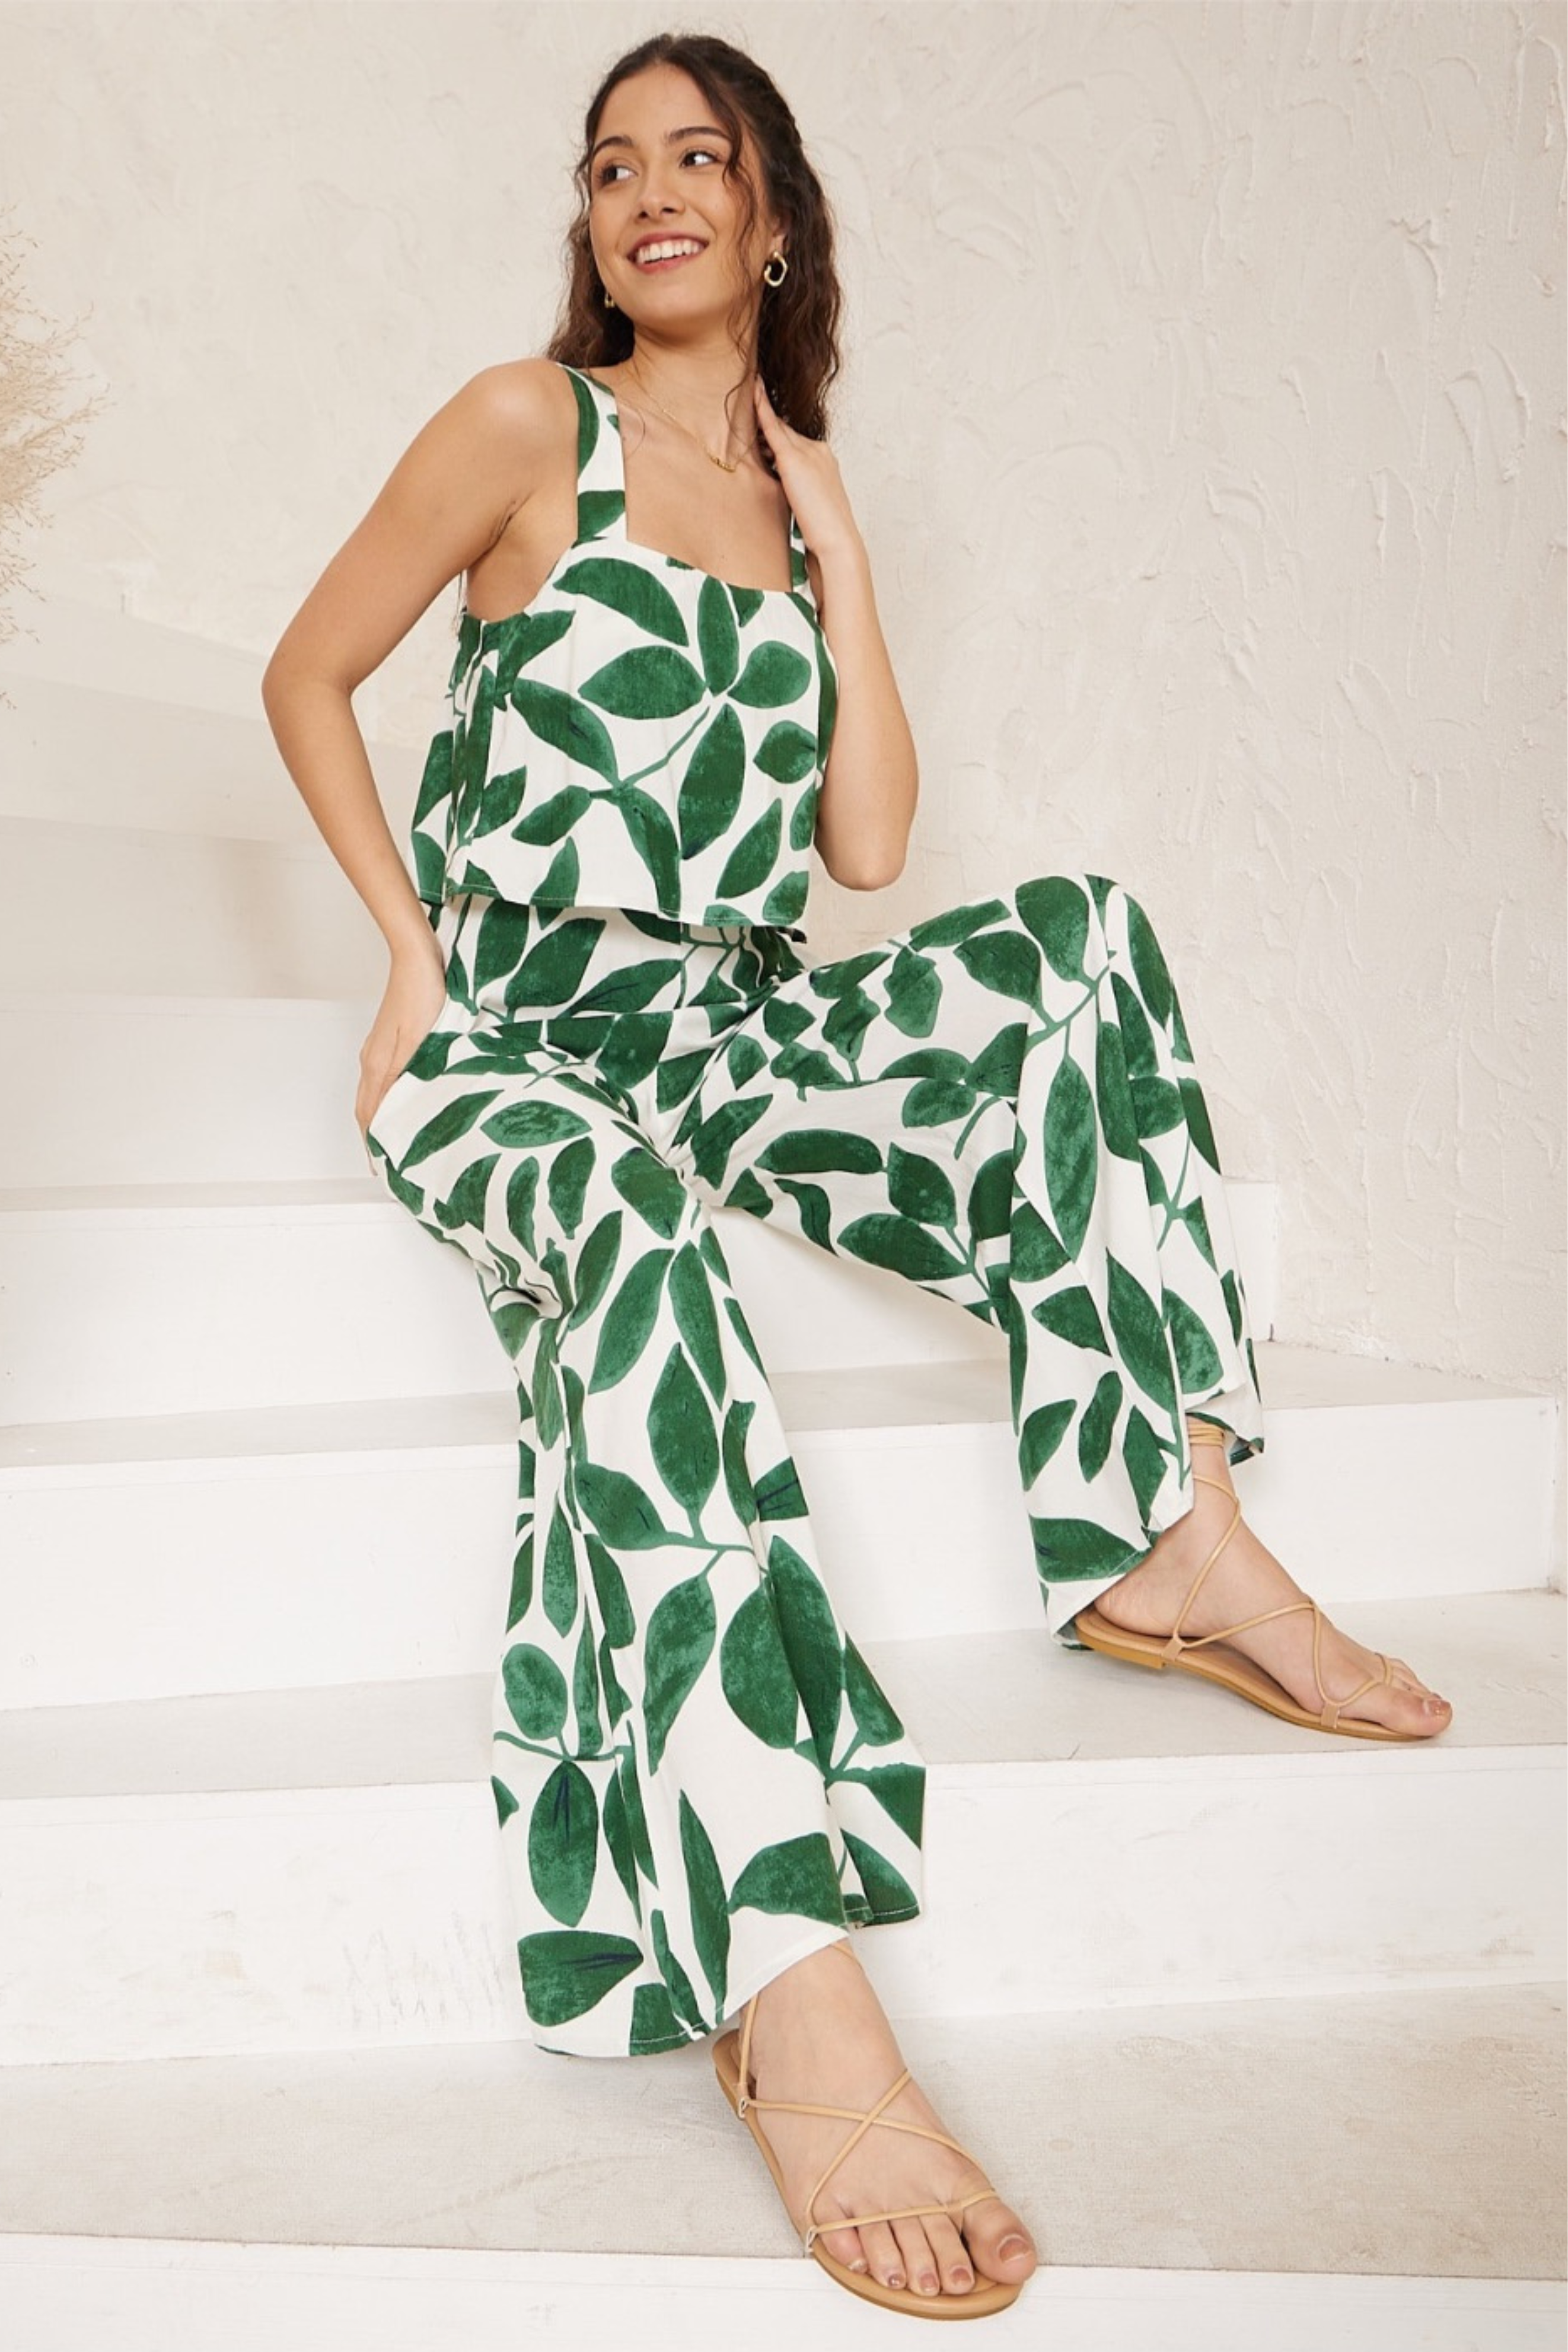 KOKO Jumpsuit in White and Green